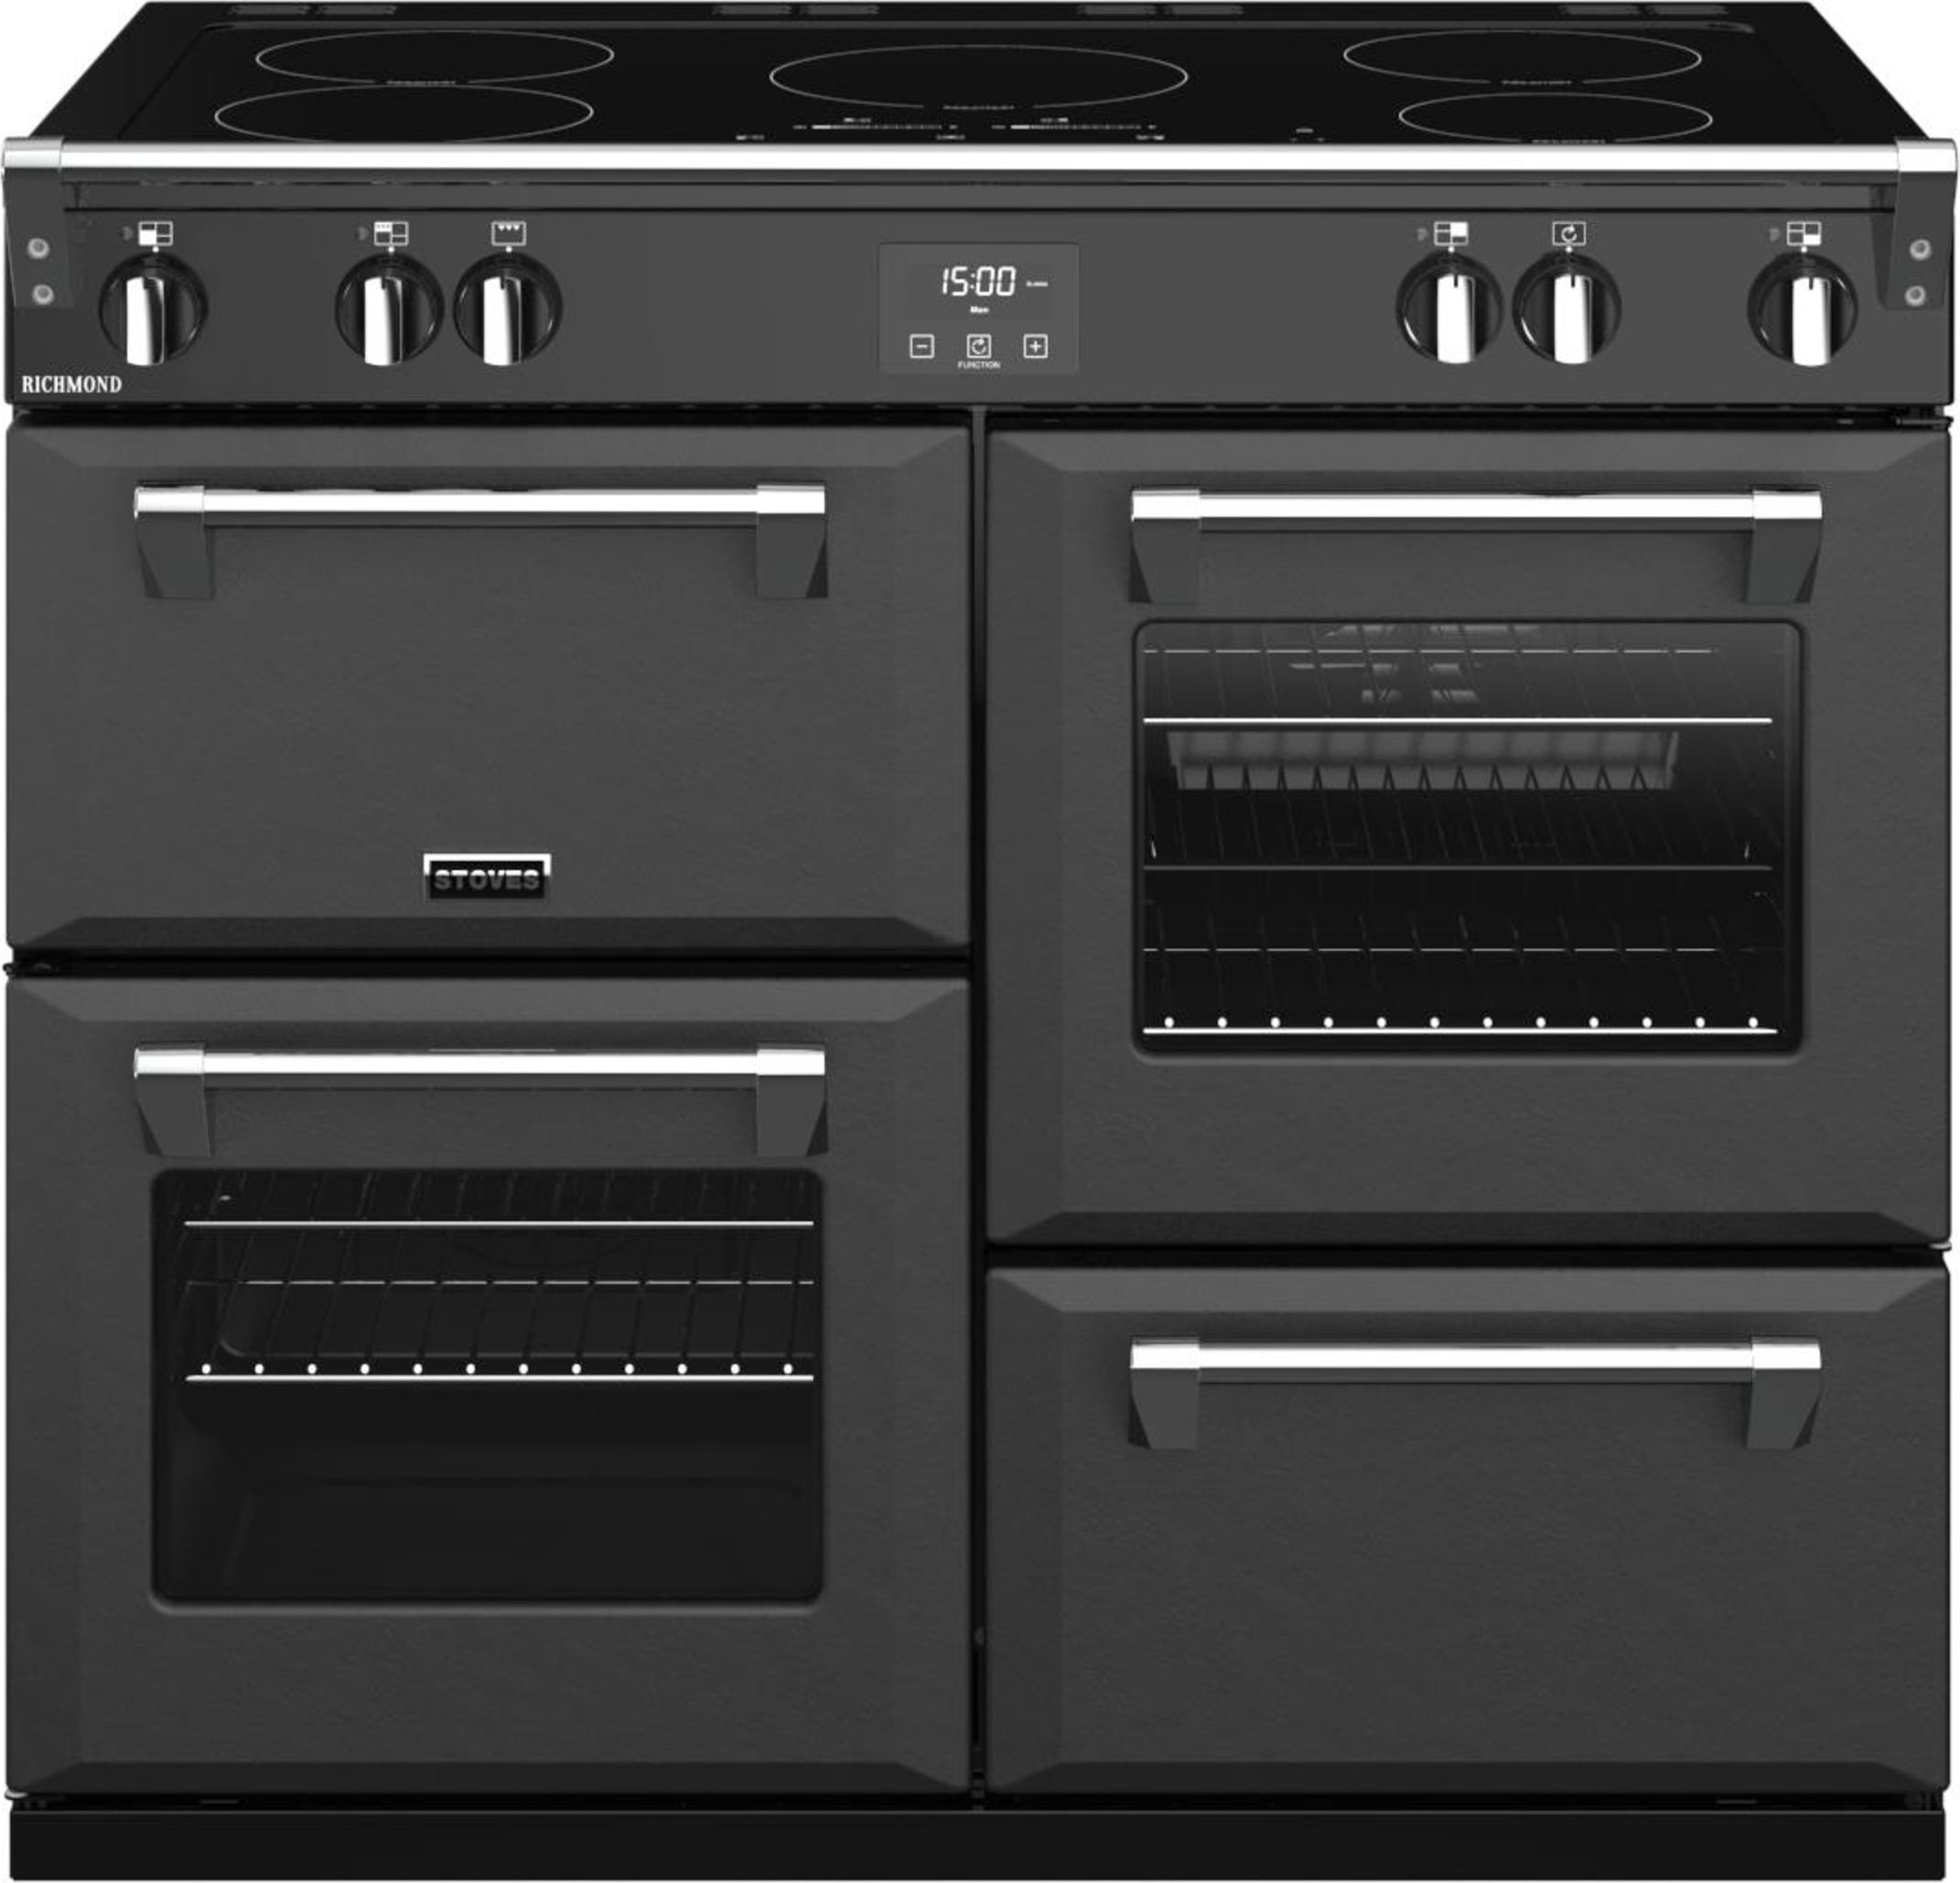 Stoves Richmond ST RICH S1000Ei MK22 ANT 100cm Electric Range Cooker with Induction Hob - Anthracite - A Rated, Black